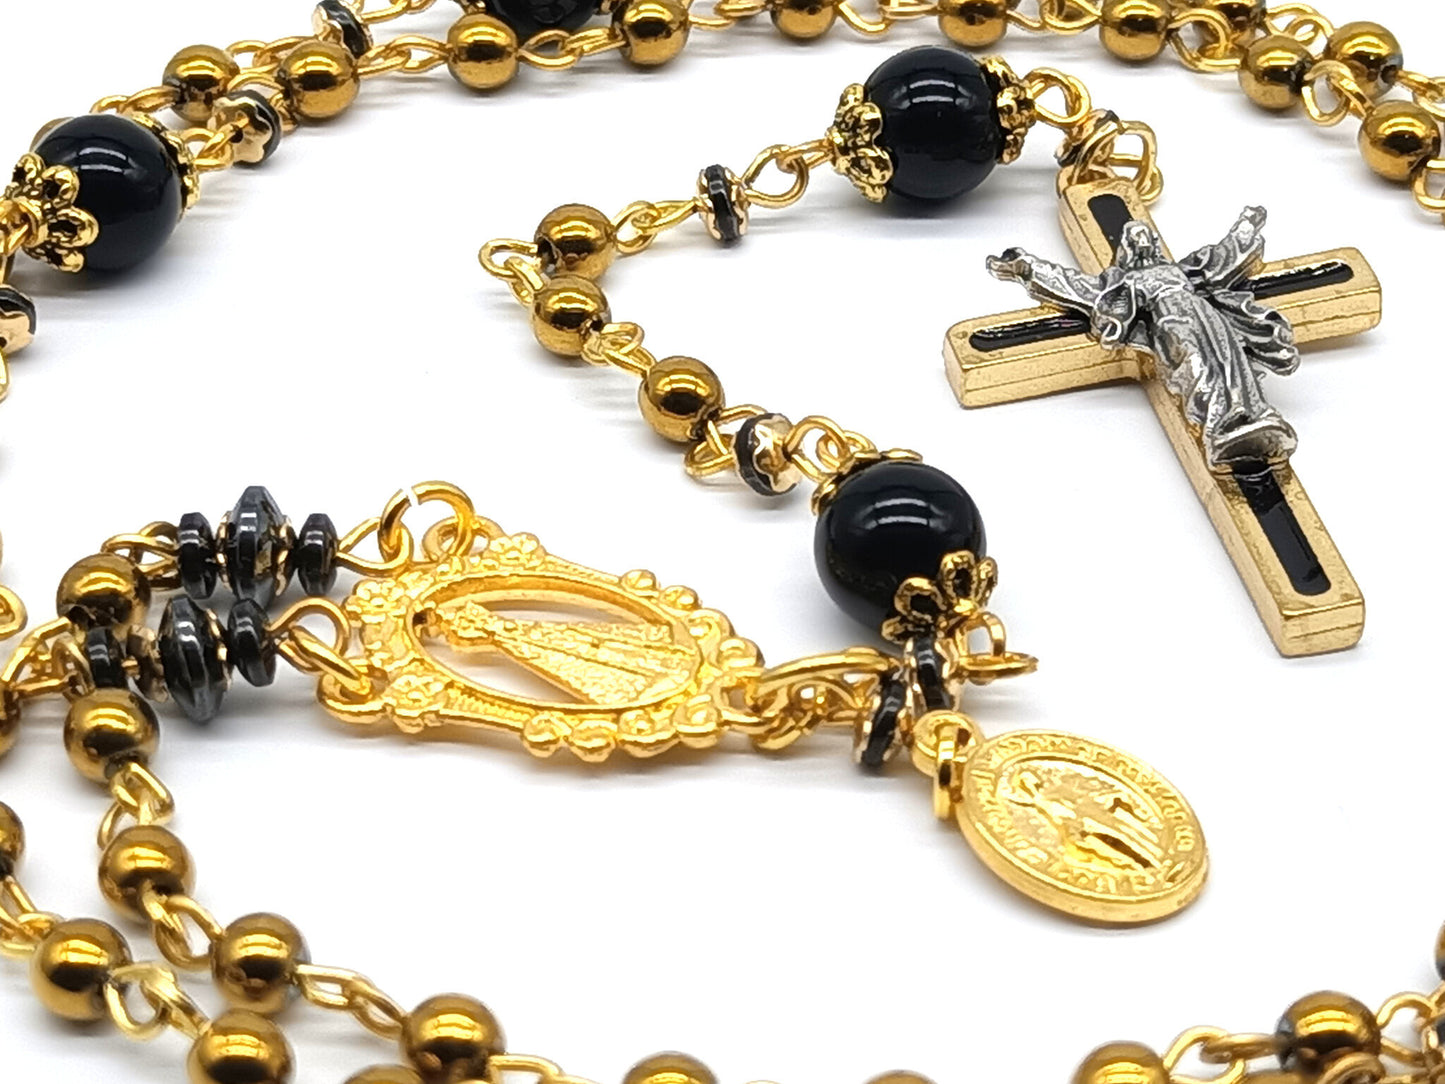 Our lady of Loretto unique rosary beads with gold hematite and onyx gemstone beads, gold and black enamel crucifix, medals and bead caps.